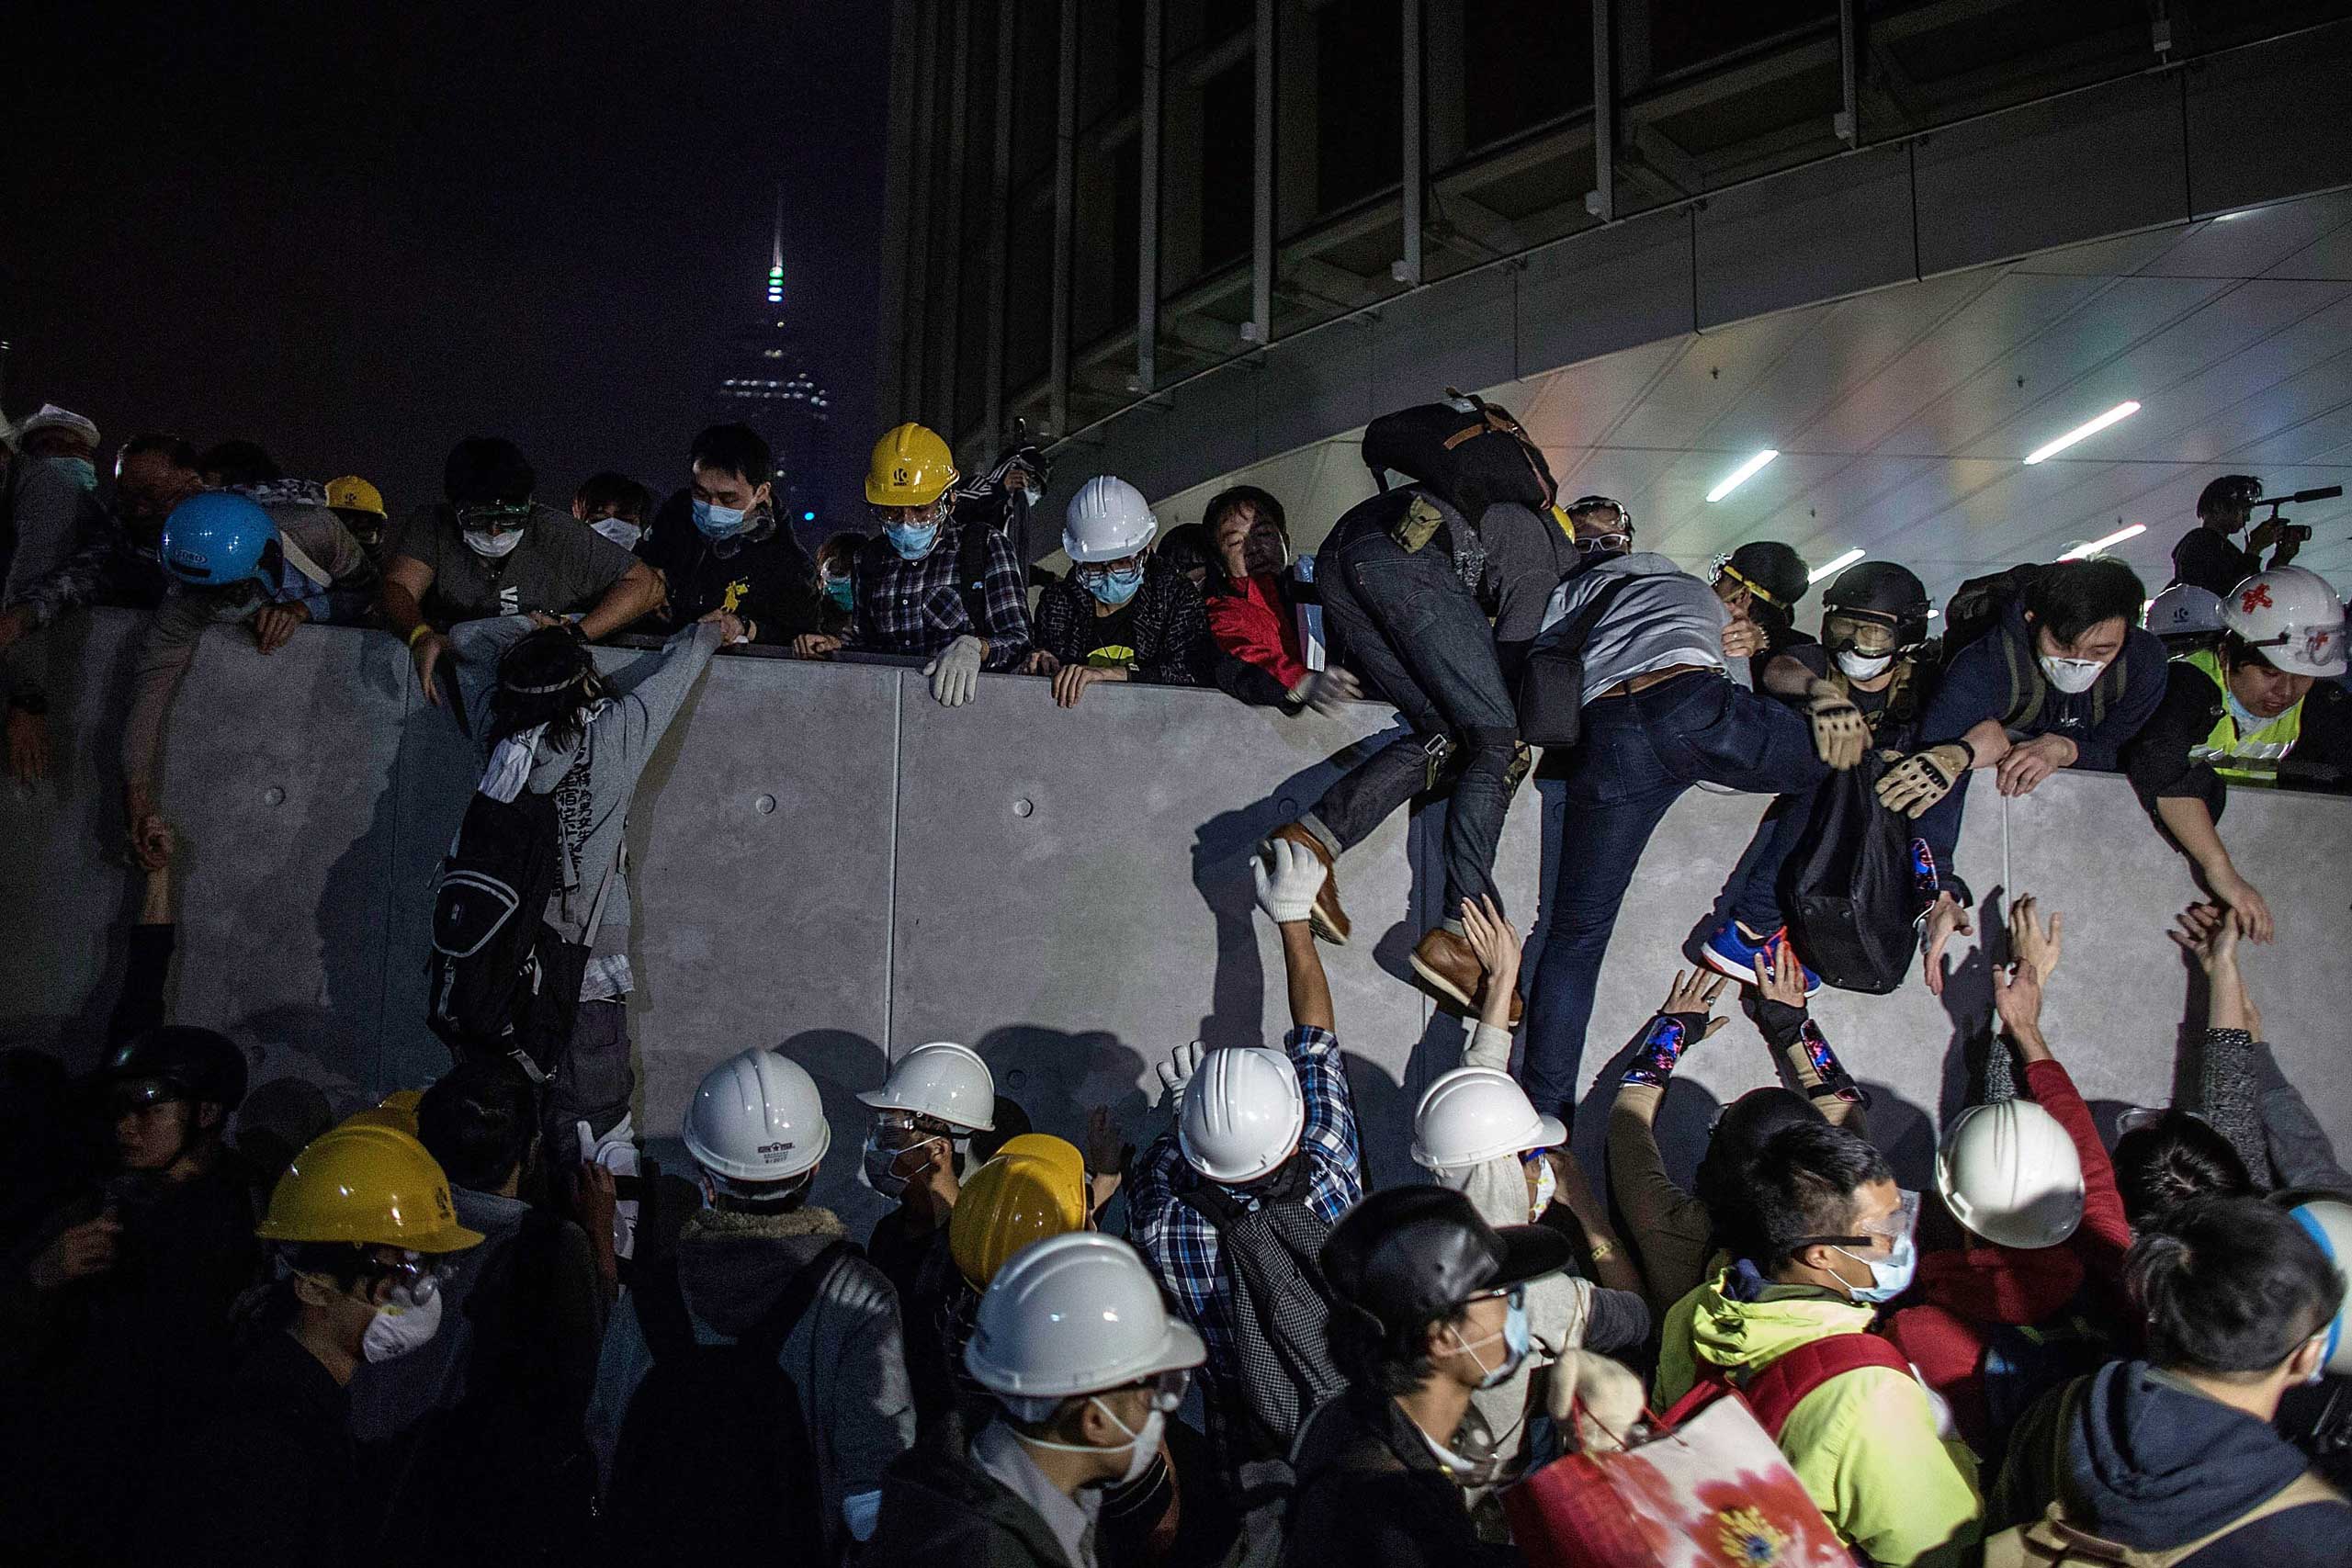 Pro-democracy protesters climb up a wall as police officers disperse them outside the Legislative Council building after clashes with pro-democracy activists on Nov. 19, 2014, in Hong Kong.